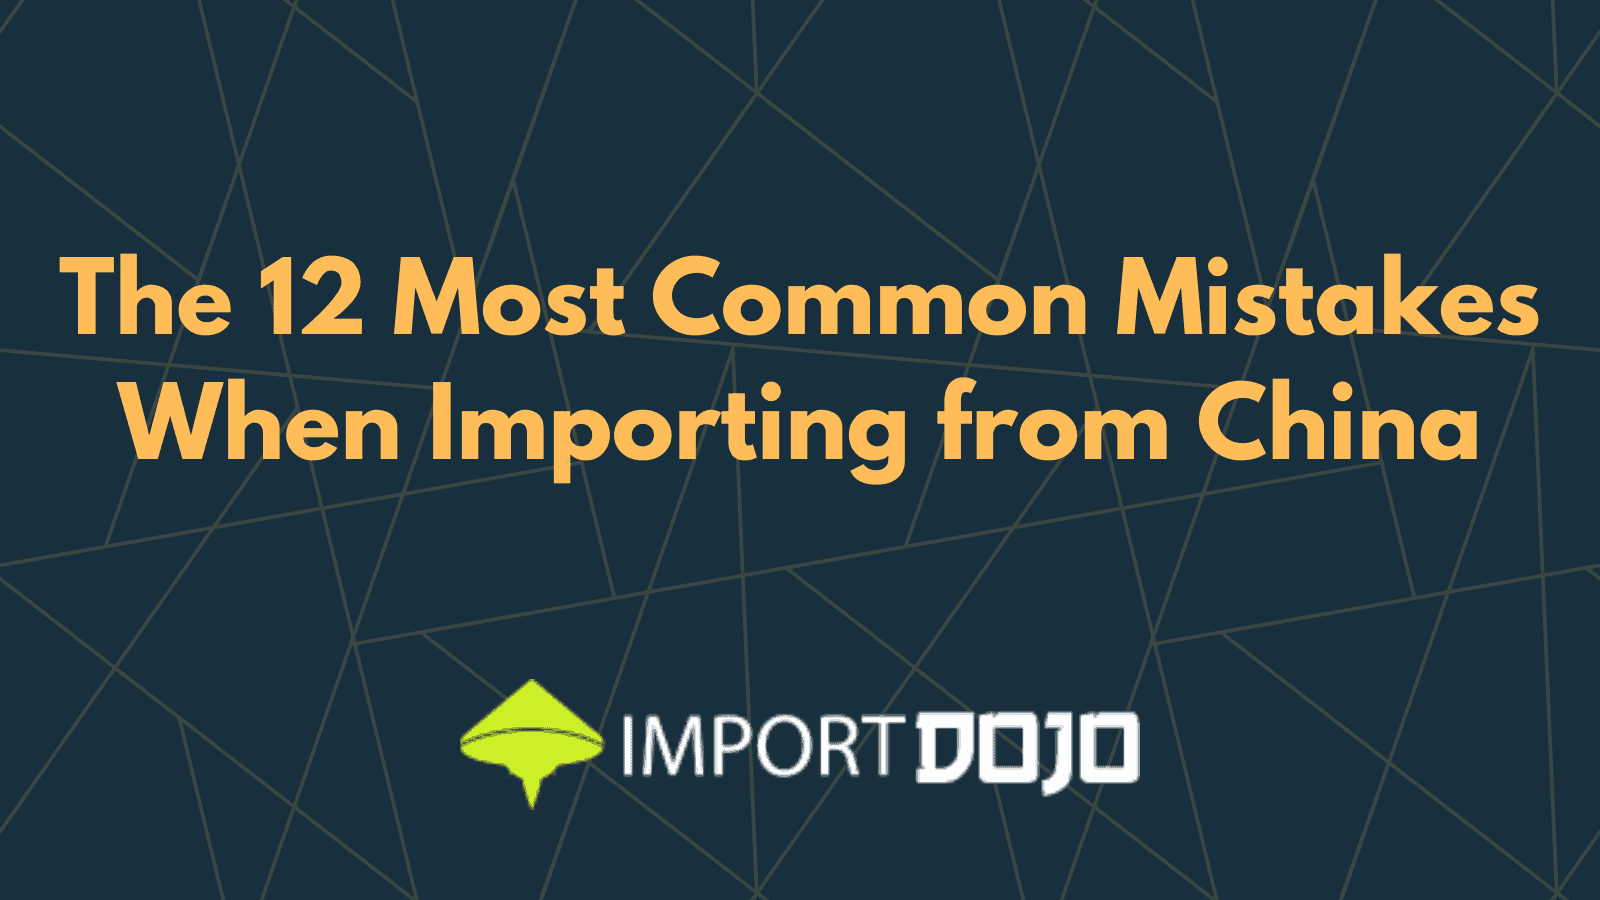 The 12 Most Common Mistakes When Importing from China